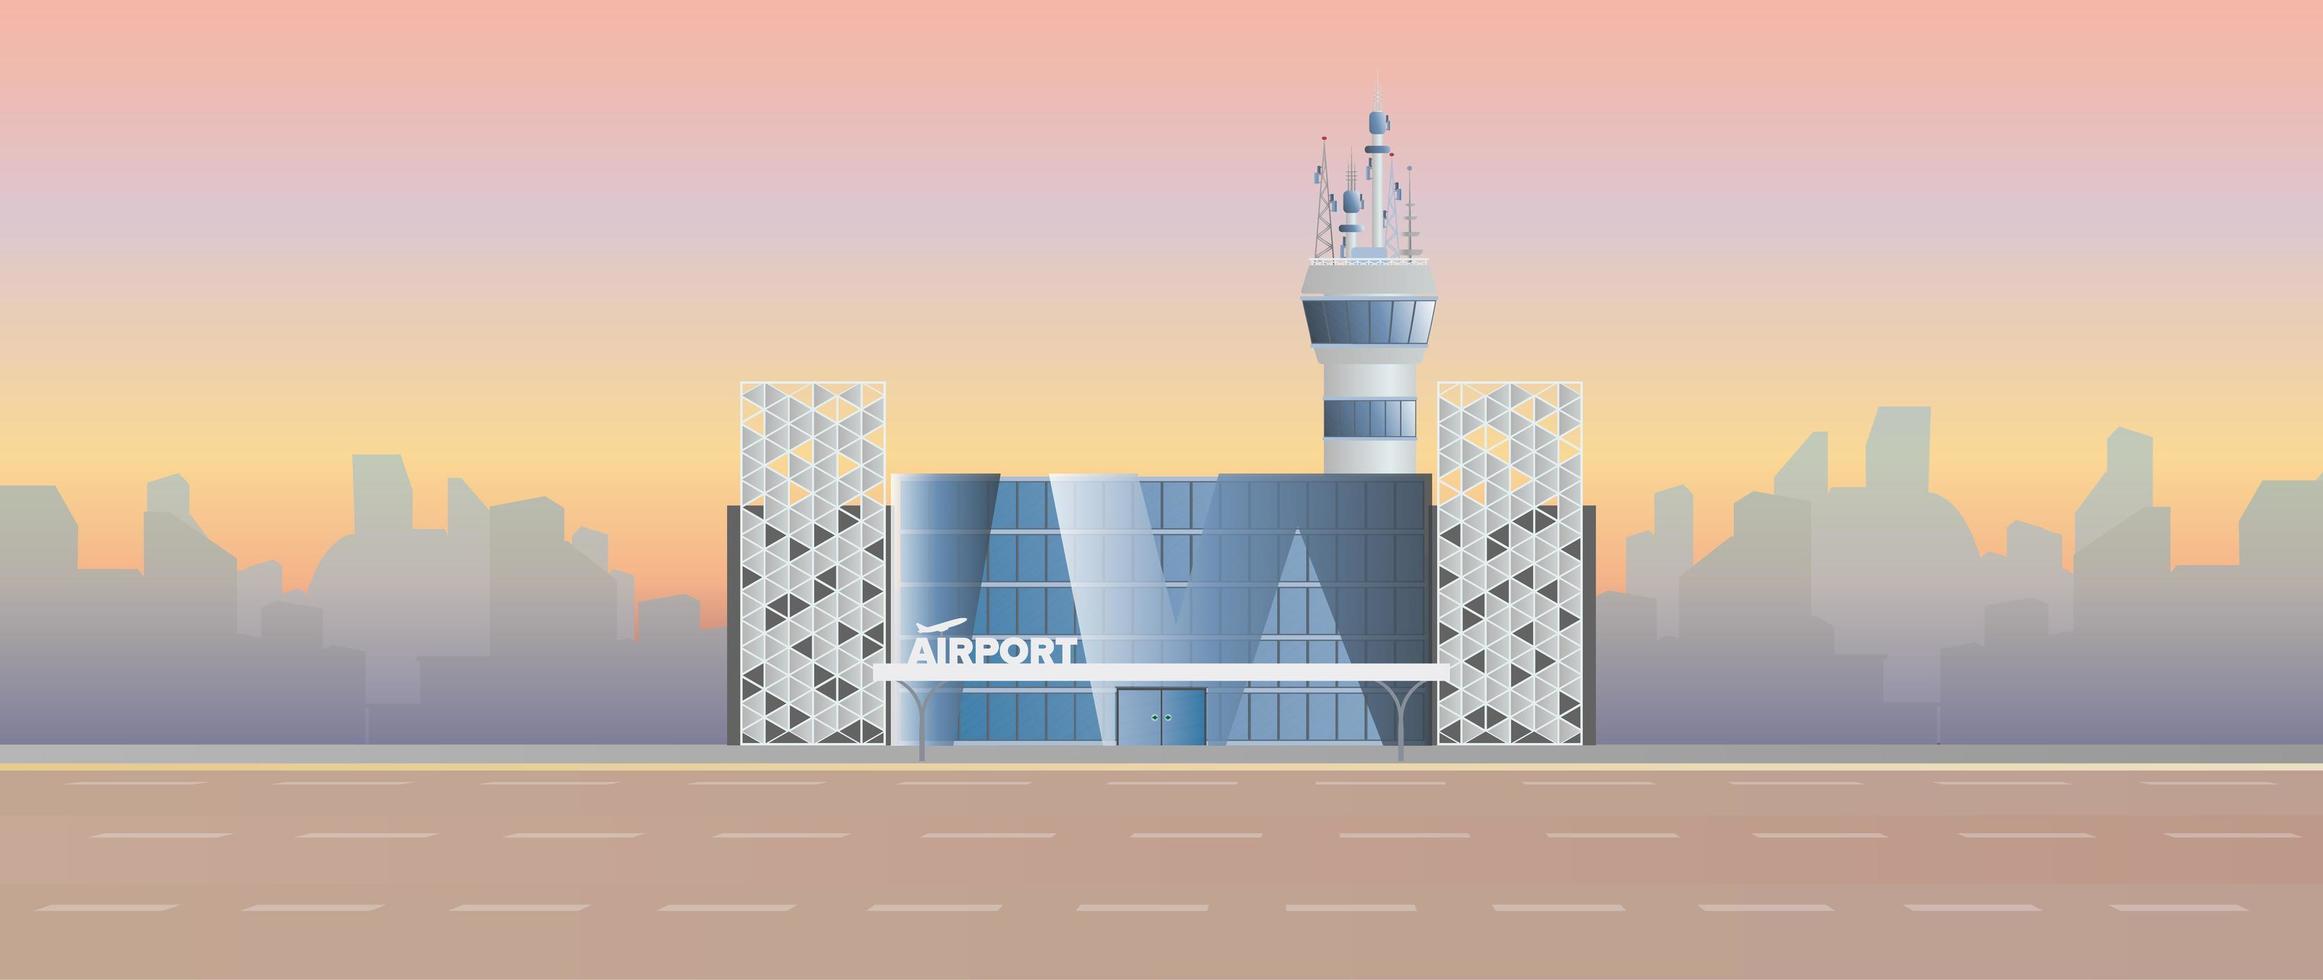 Modern airport. Runway. Airport in a flat style. Silhouetted by the city. Vector illustration